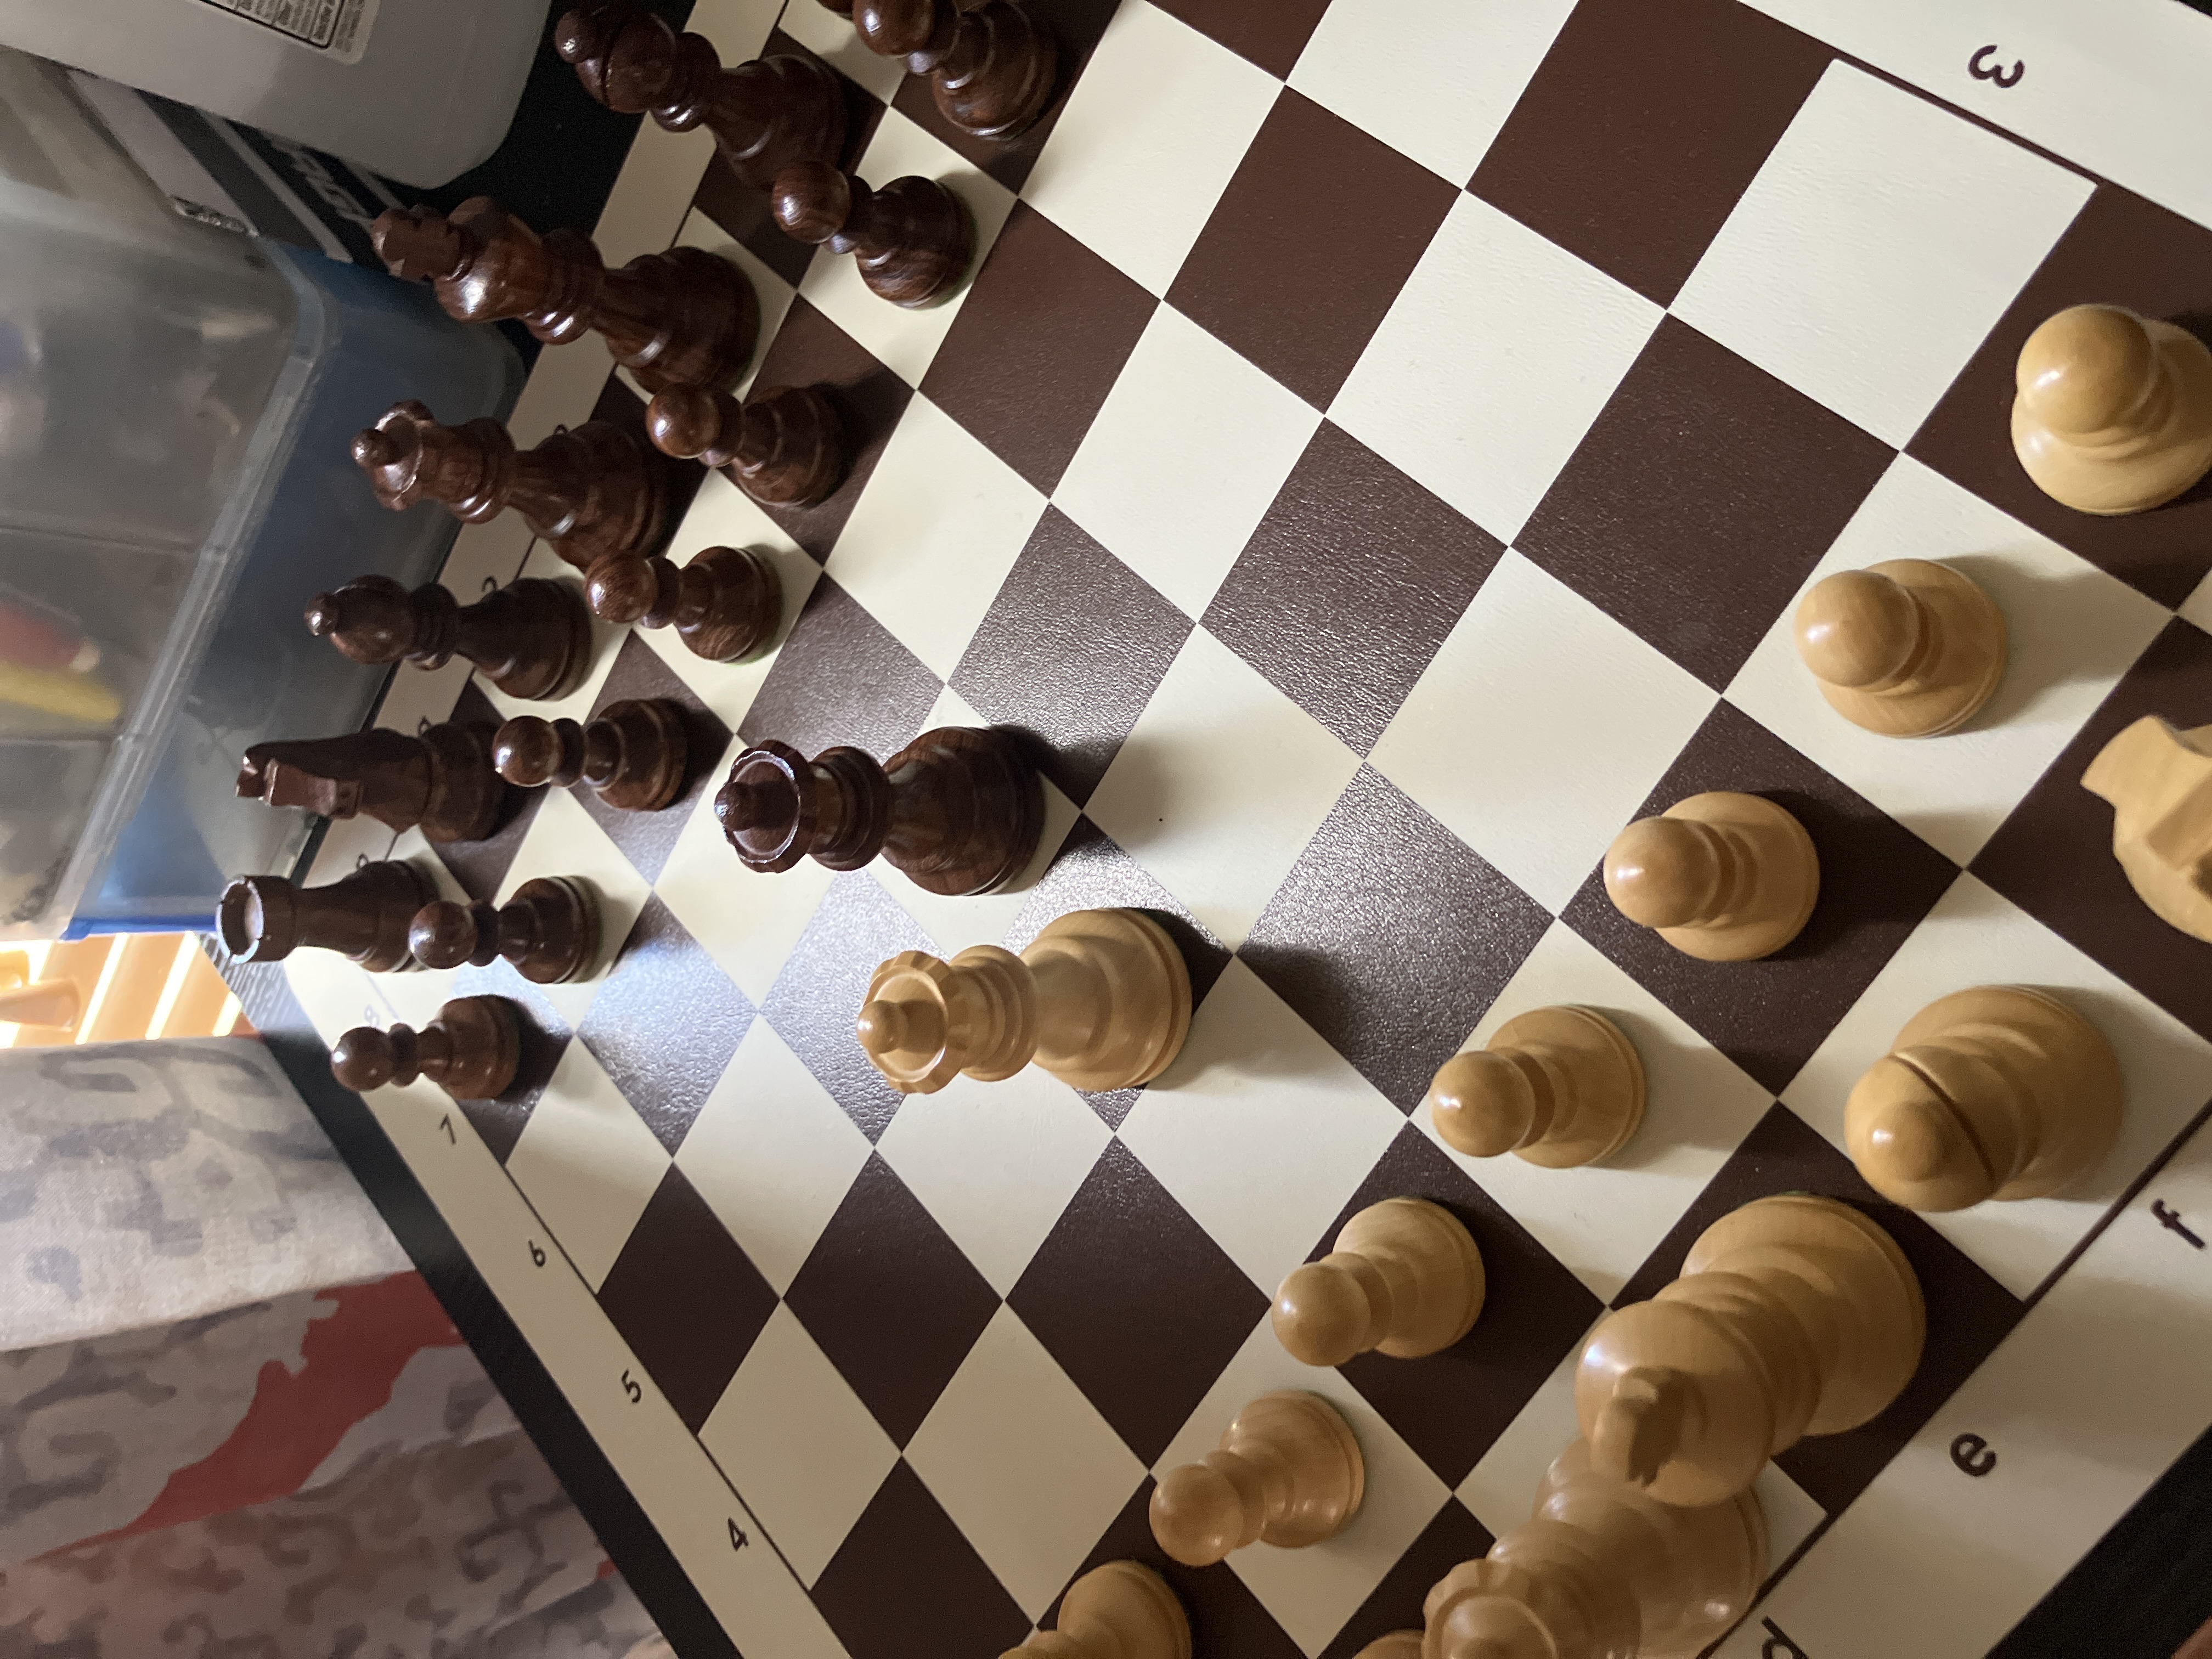 Luxury Chess Pieces, Royal Chess Mall, by Royal Chess Mall